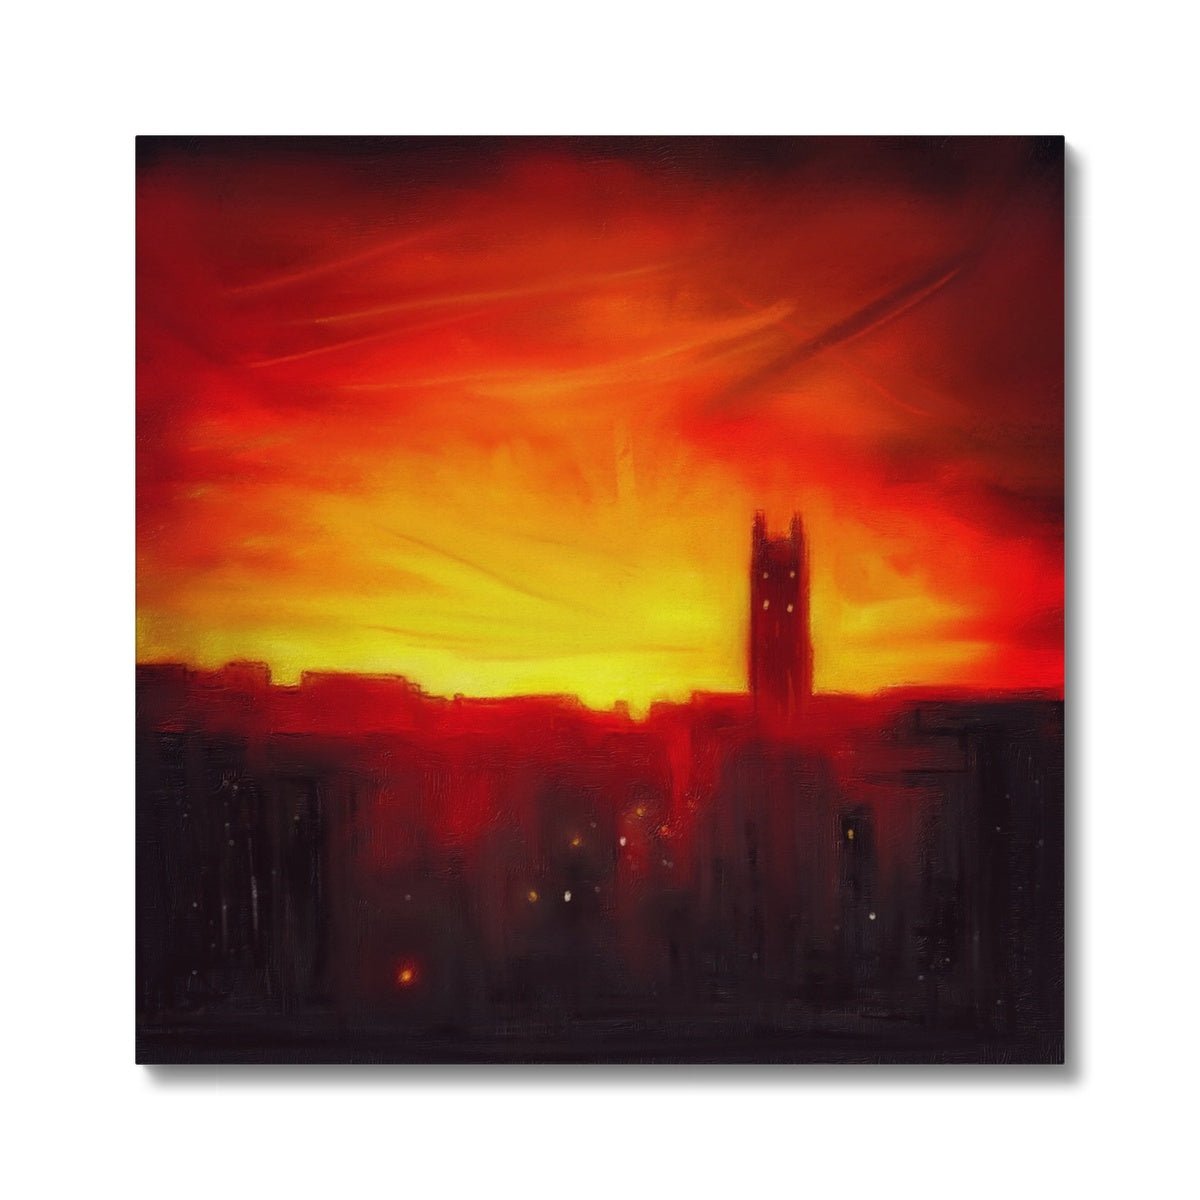 St Stephen's Church Sunset Painting | Canvas From Scotland-Contemporary Stretched Canvas Prints-Edinburgh & Glasgow Art Gallery-24"x24"-Paintings, Prints, Homeware, Art Gifts From Scotland By Scottish Artist Kevin Hunter